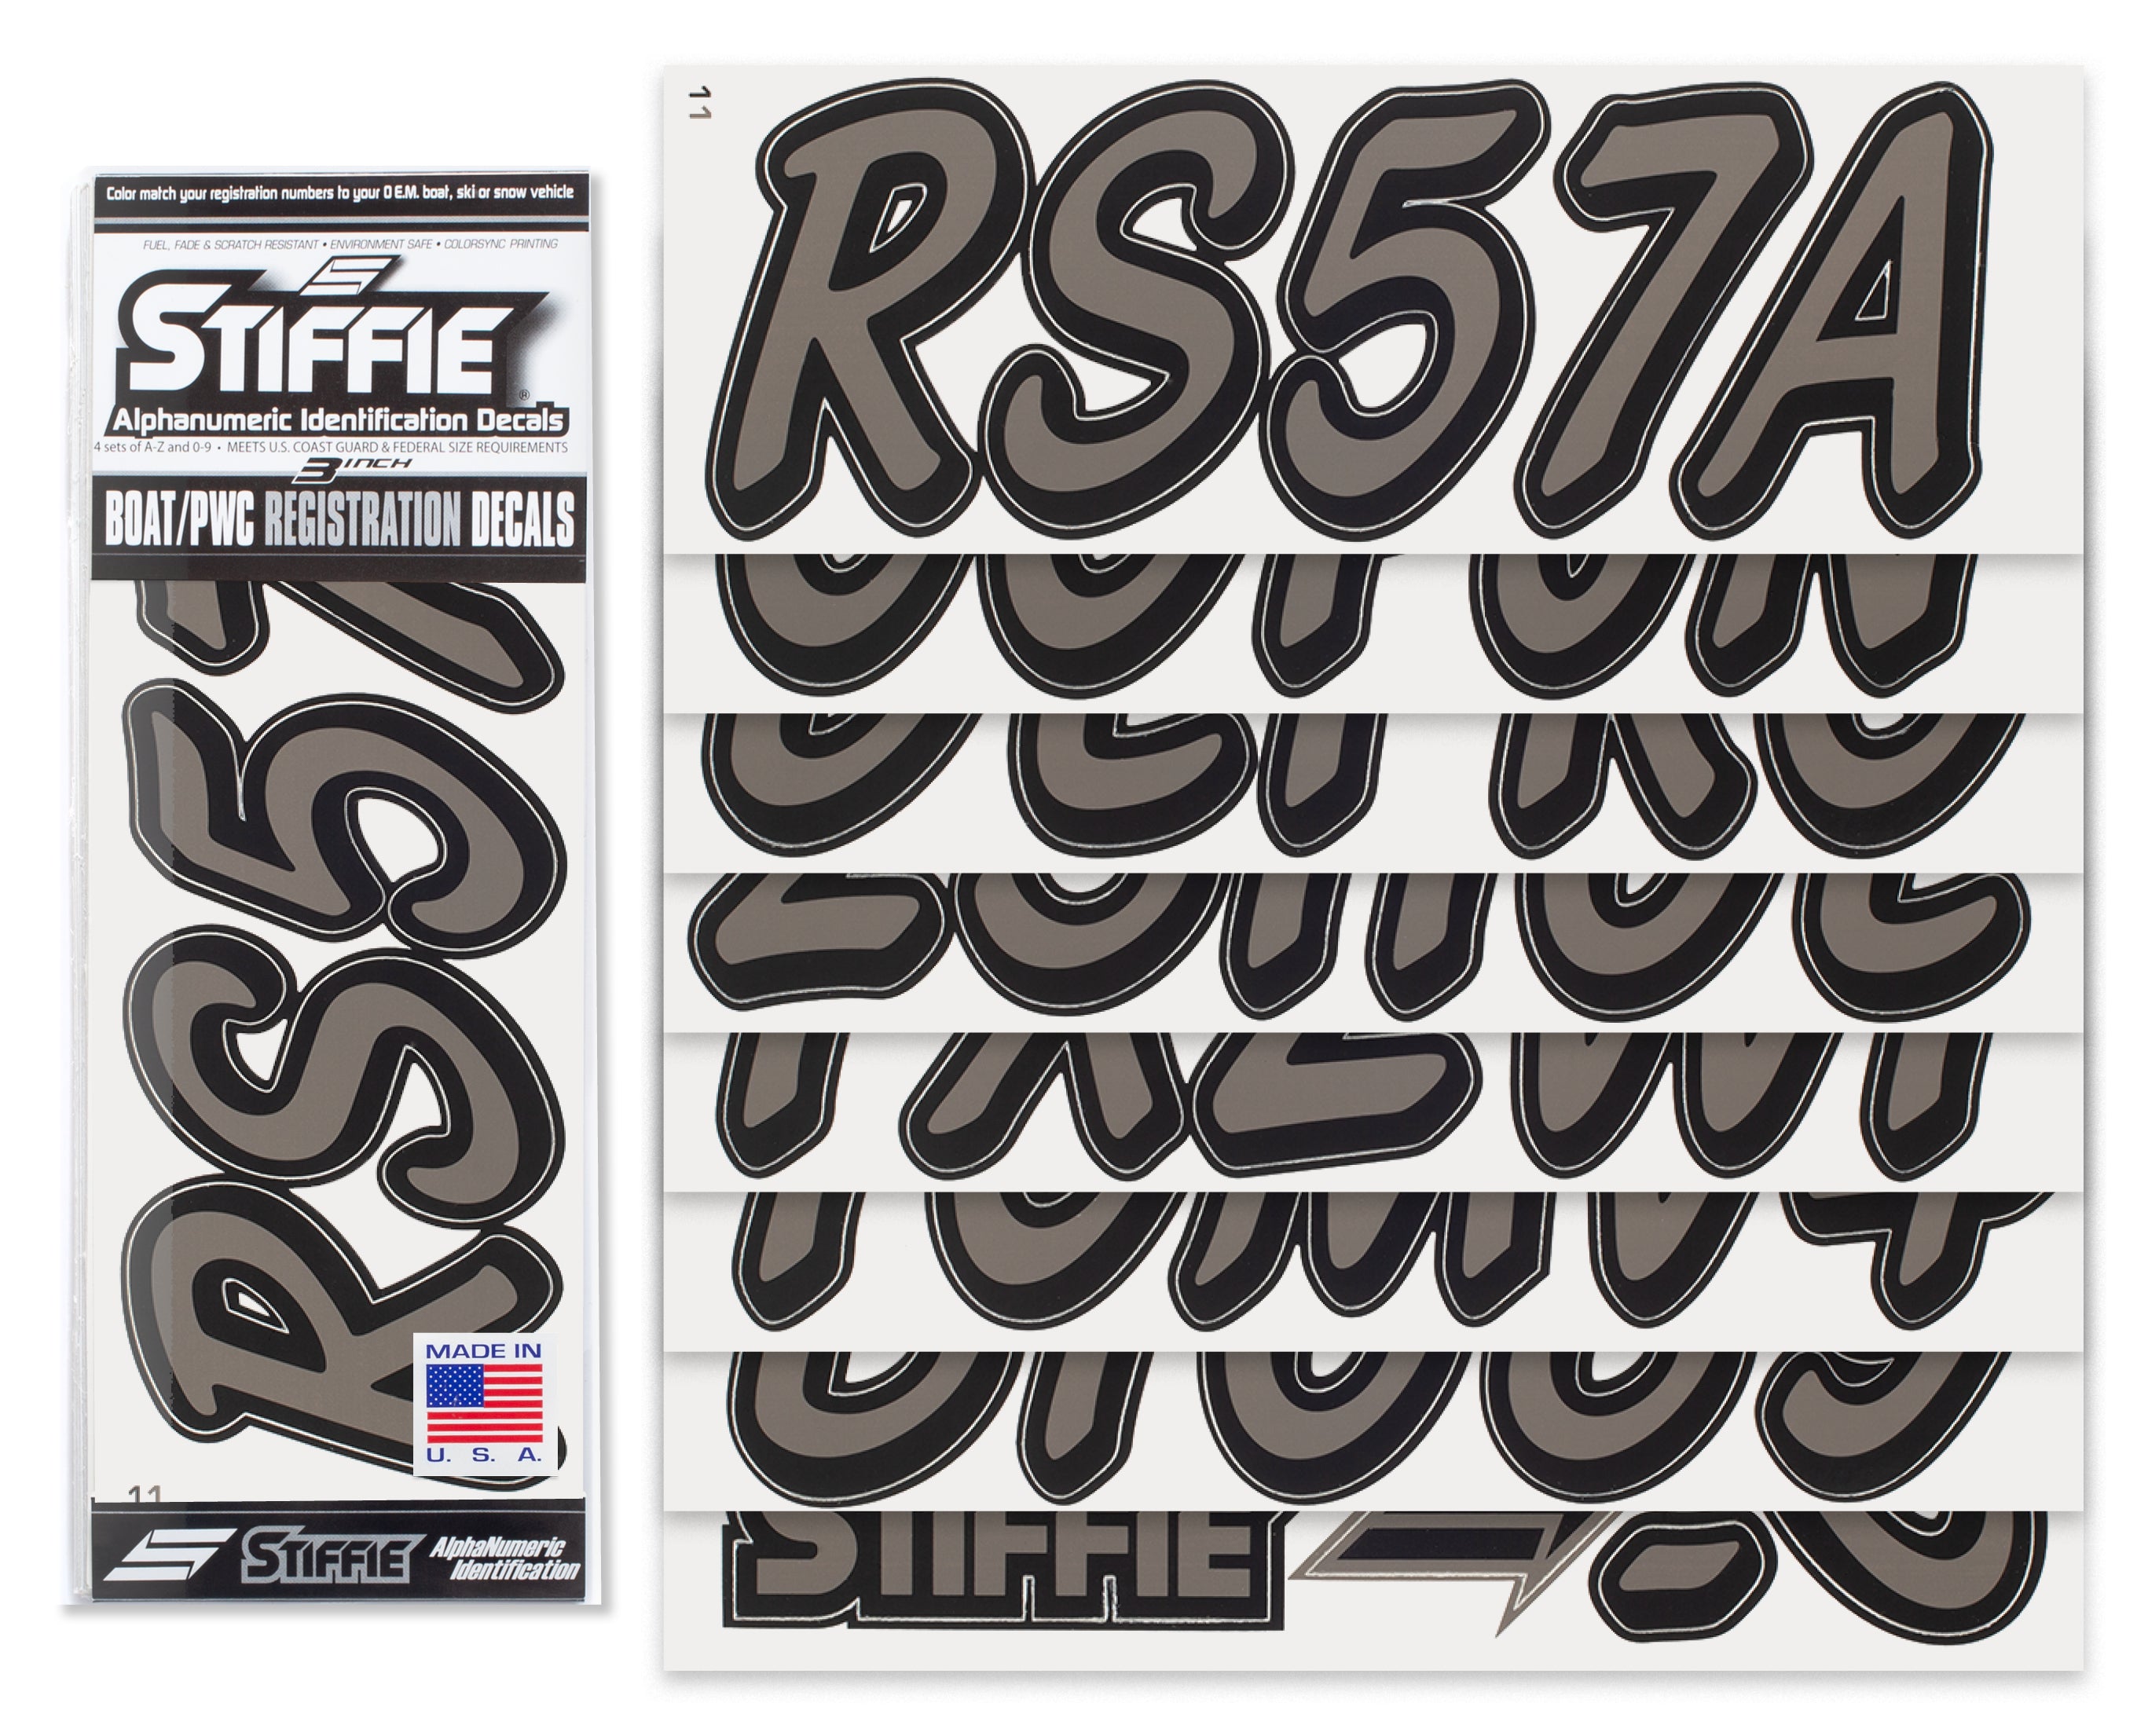 STIFFIE Whipline Solid Charcoal/Black 3" Alpha-Numeric Registration Identification Numbers Stickers Decals for Boats & Personal Watercraft